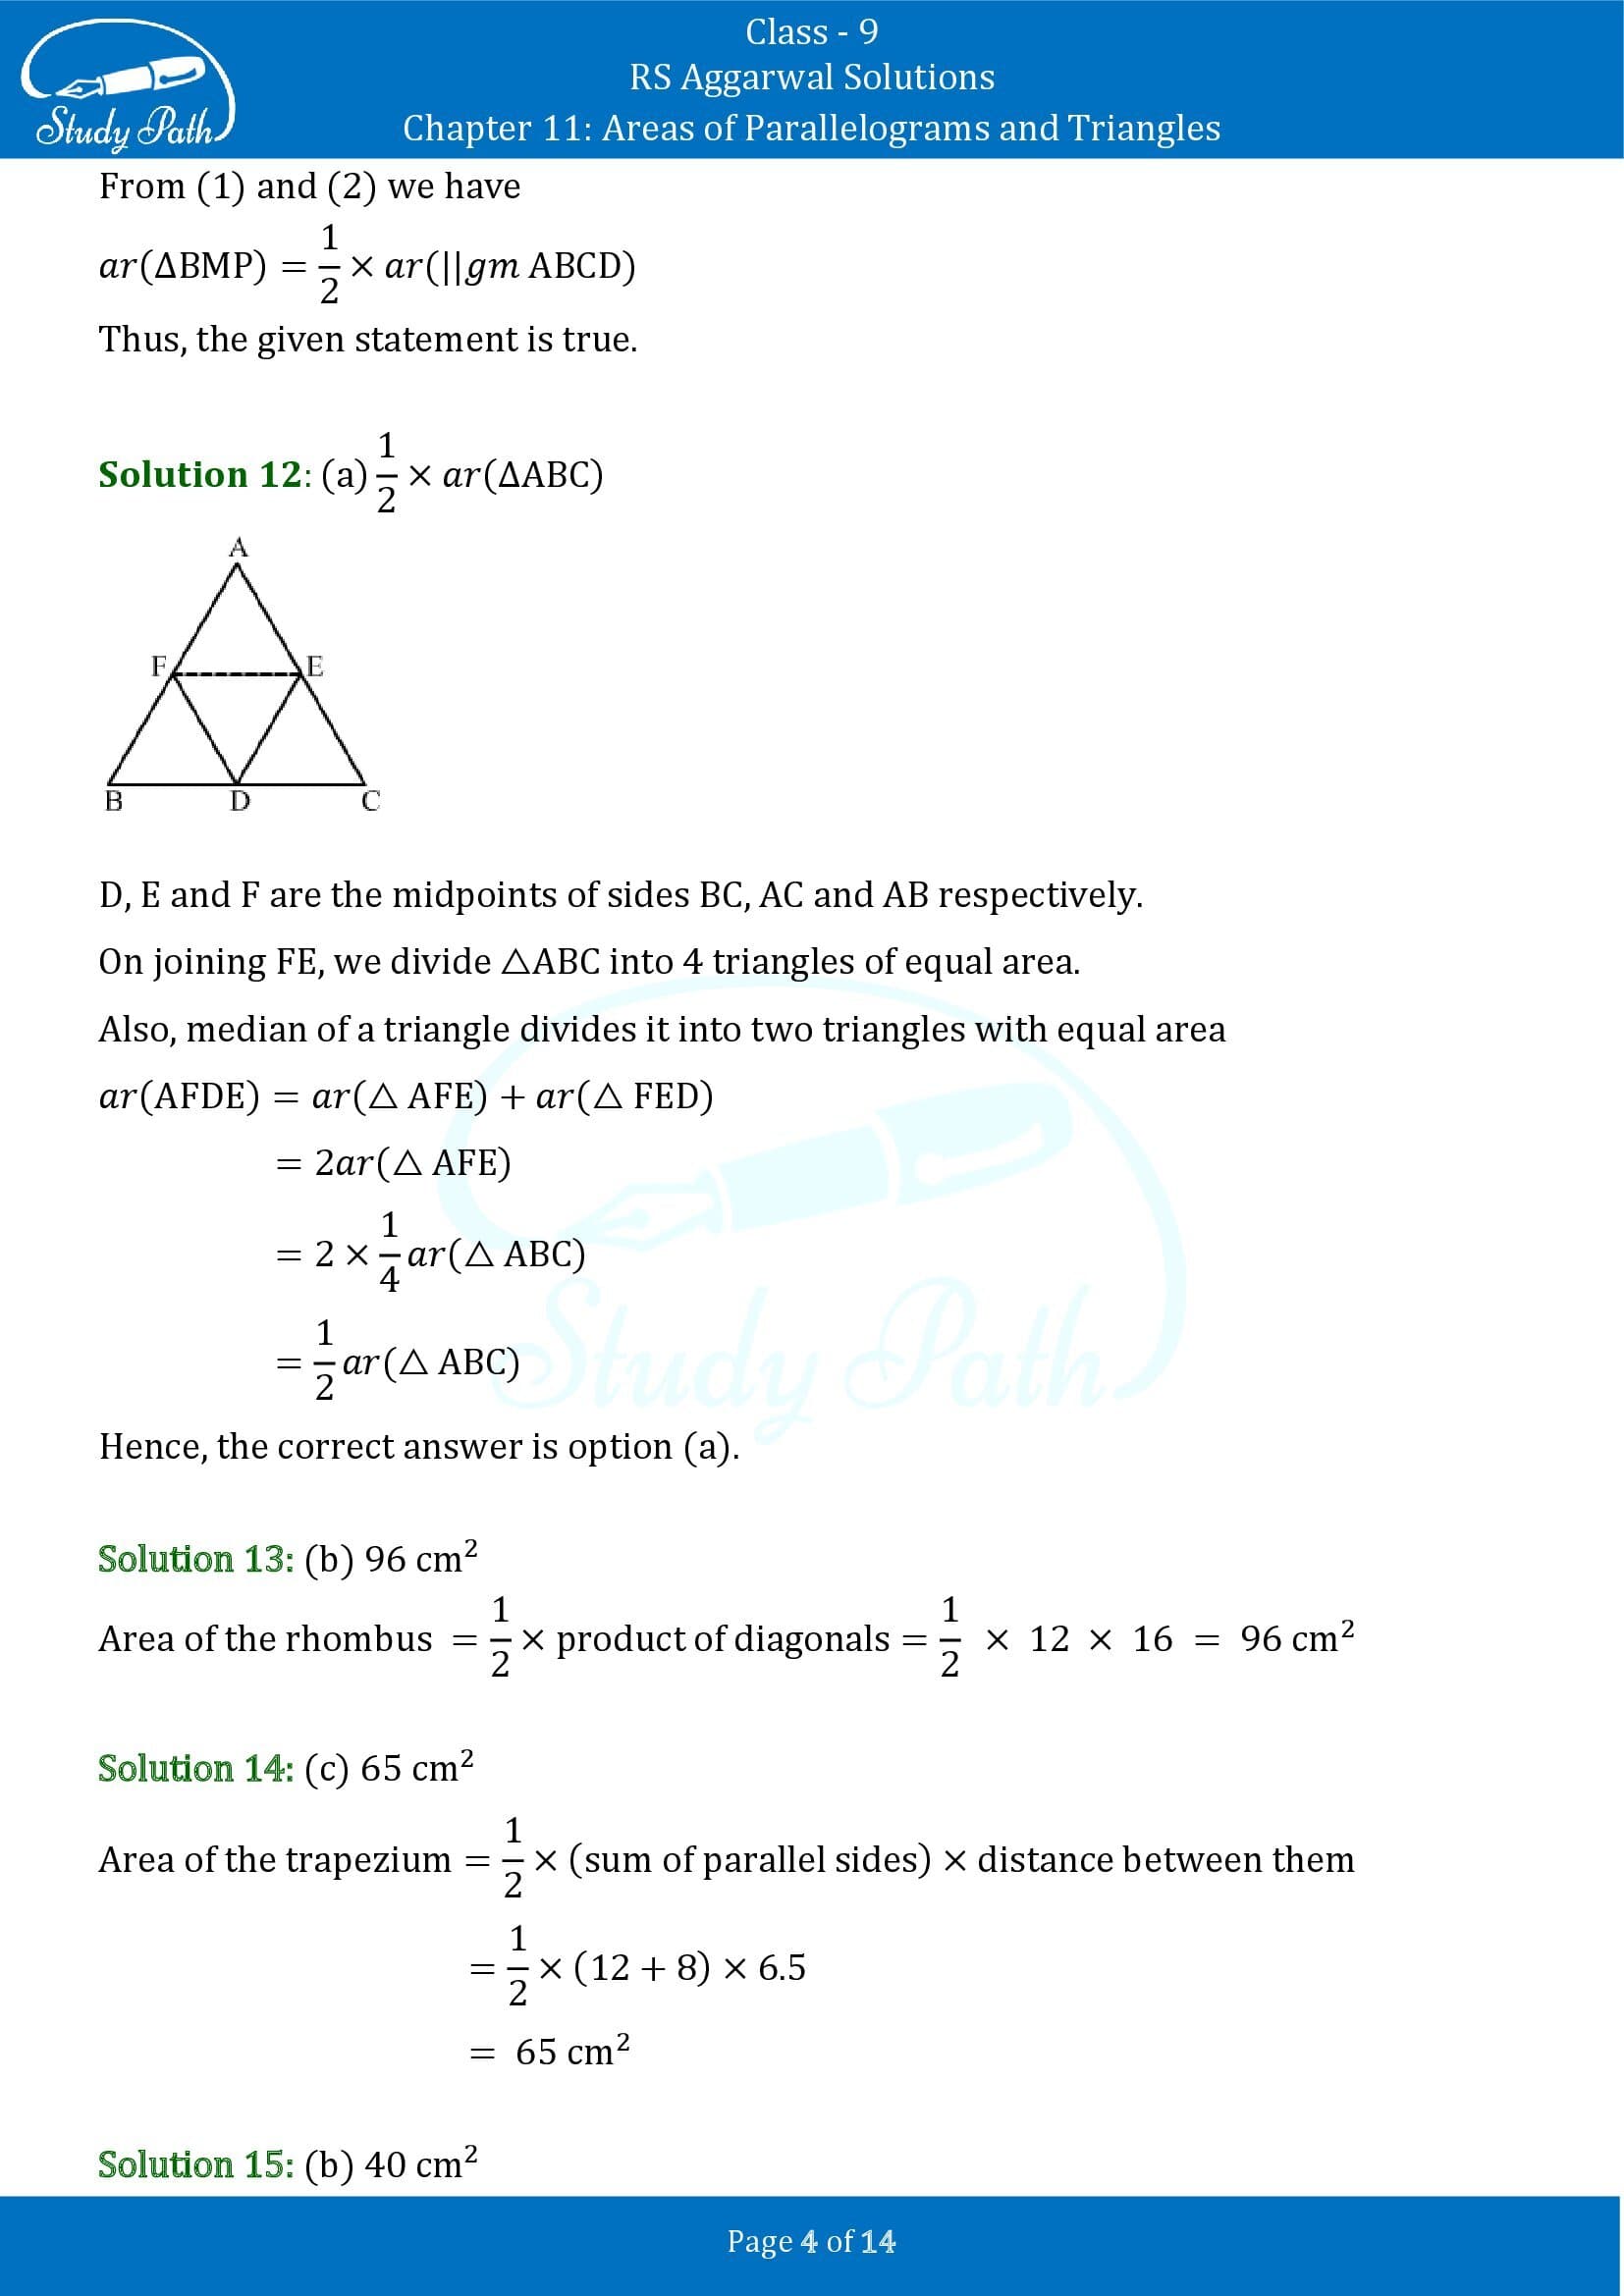 RS Aggarwal Solutions Class 9 Chapter 11 Areas of Parallelograms and Triangles Multiple Choice Questions MCQs 00004